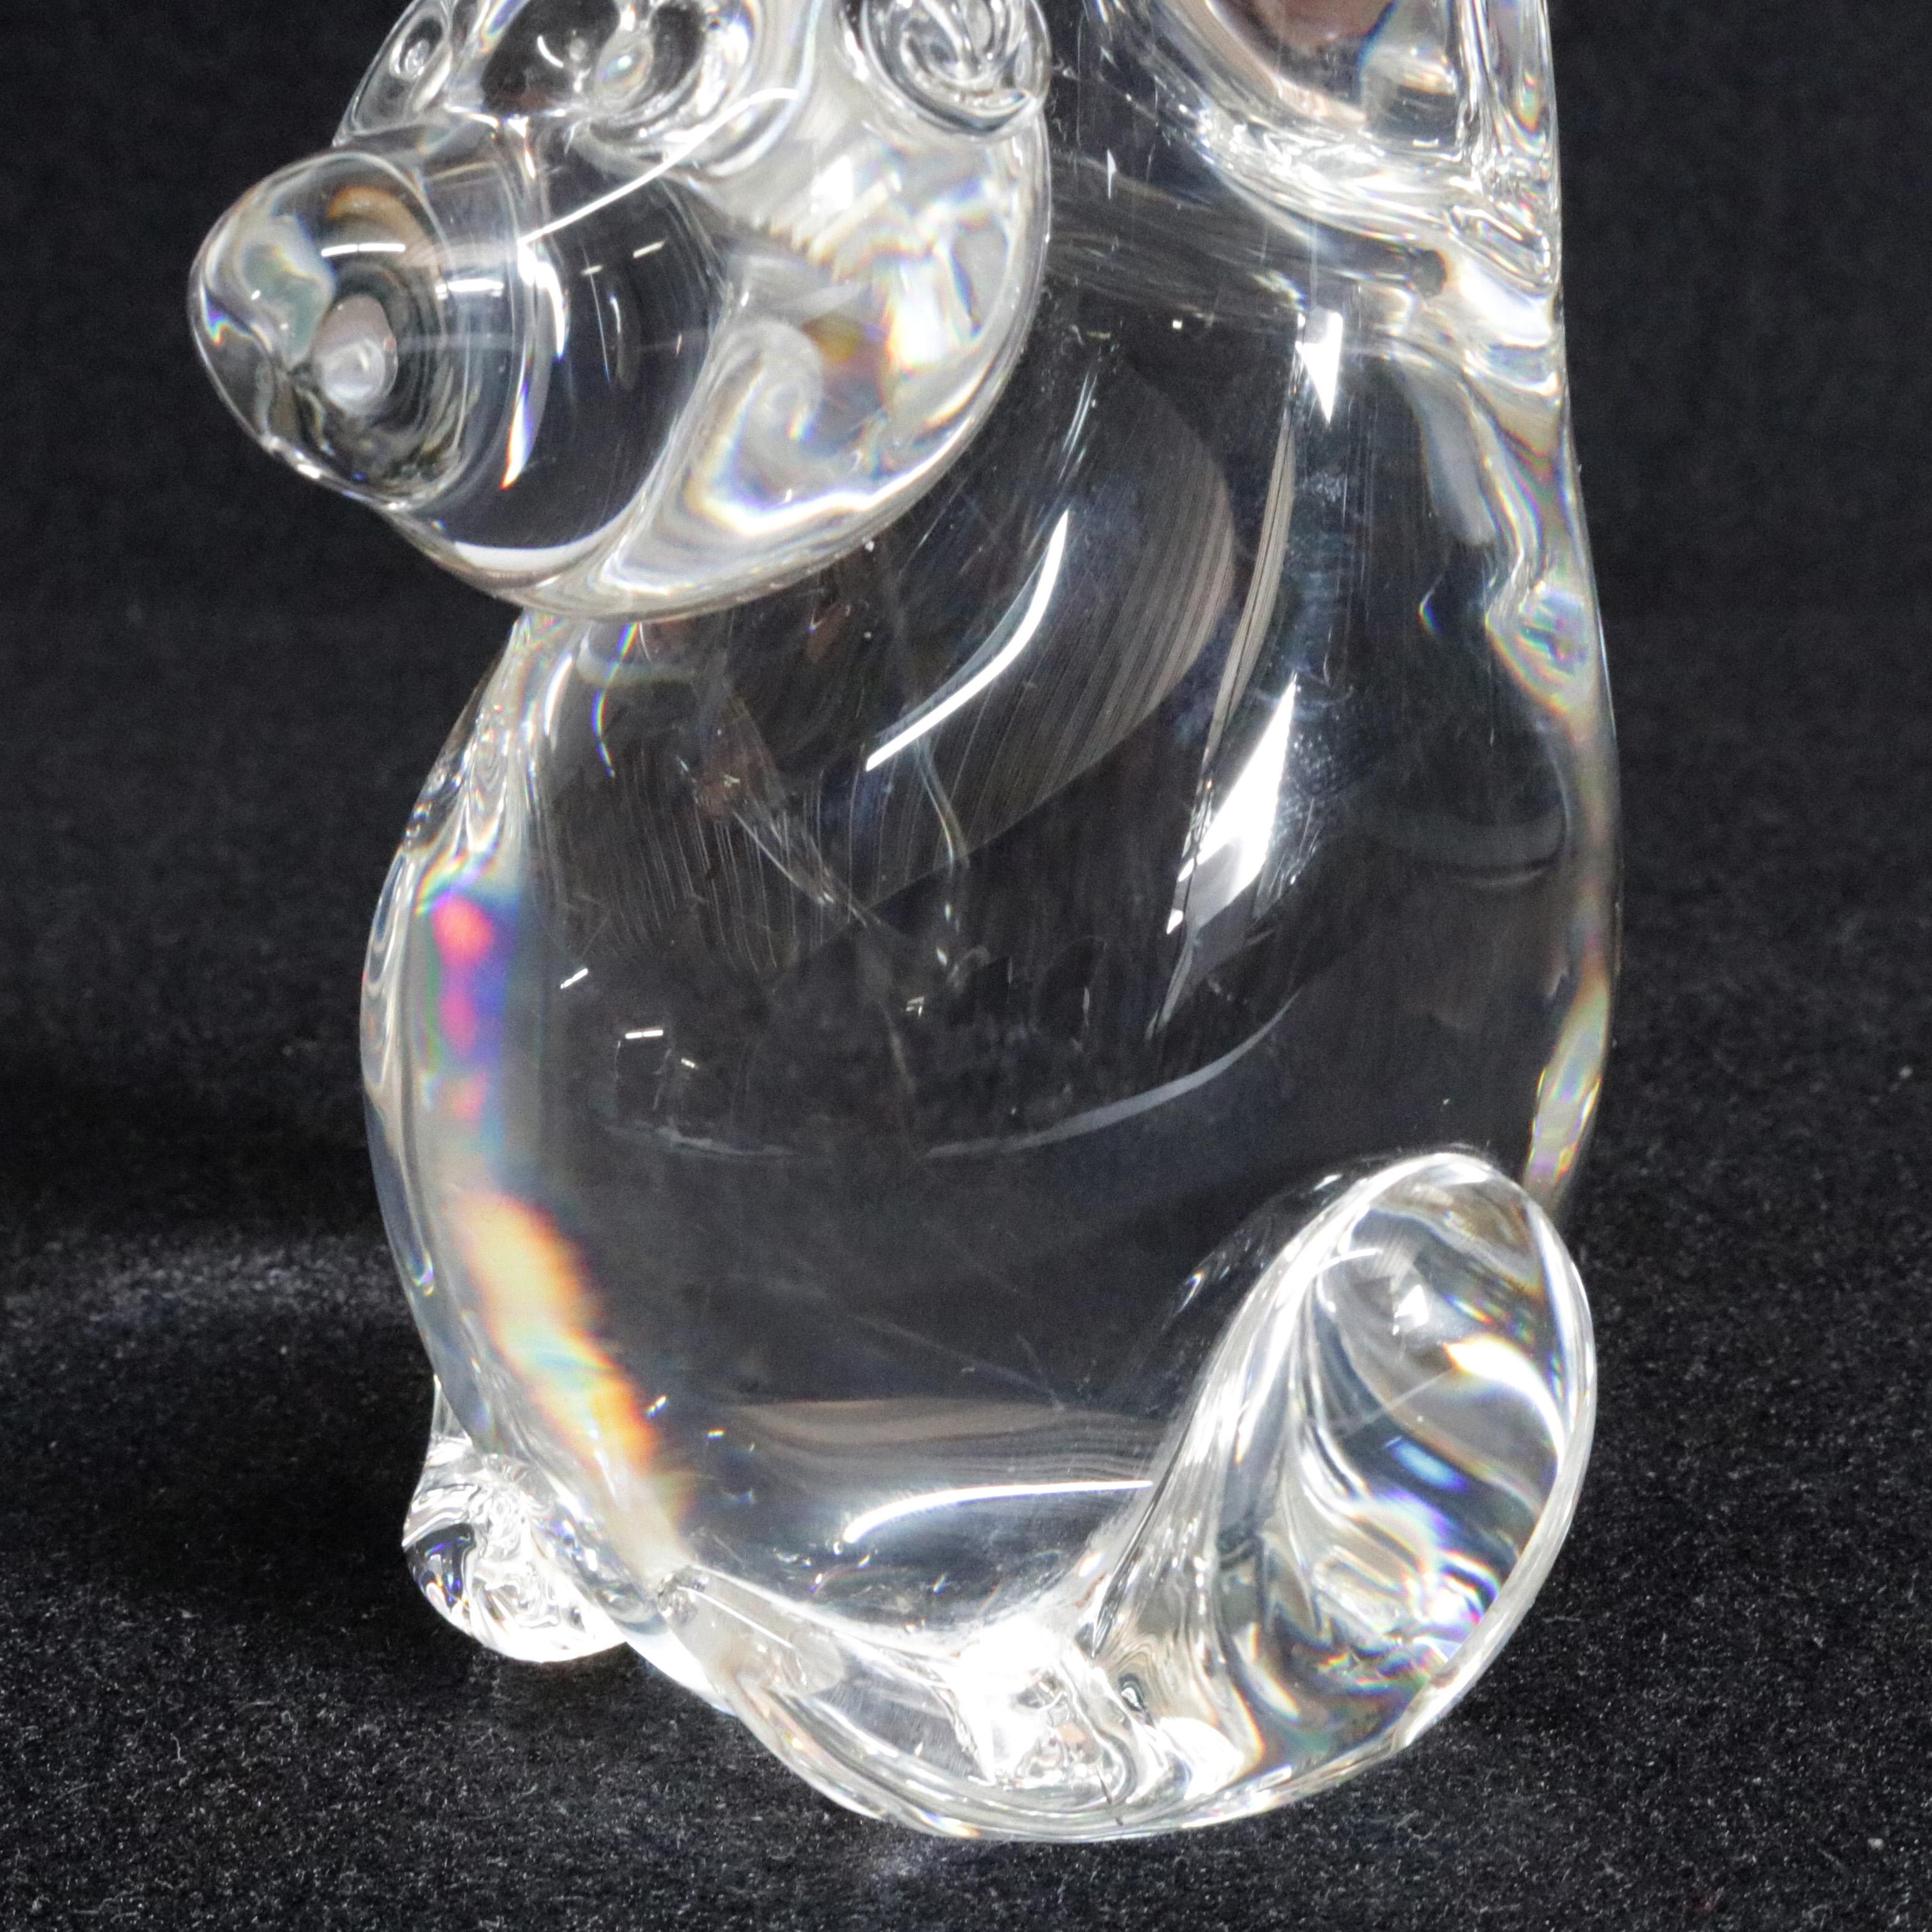 20th Century Steuben Figurative Crystal Sculpture Monkey Paperweight by de Sousa, Signed